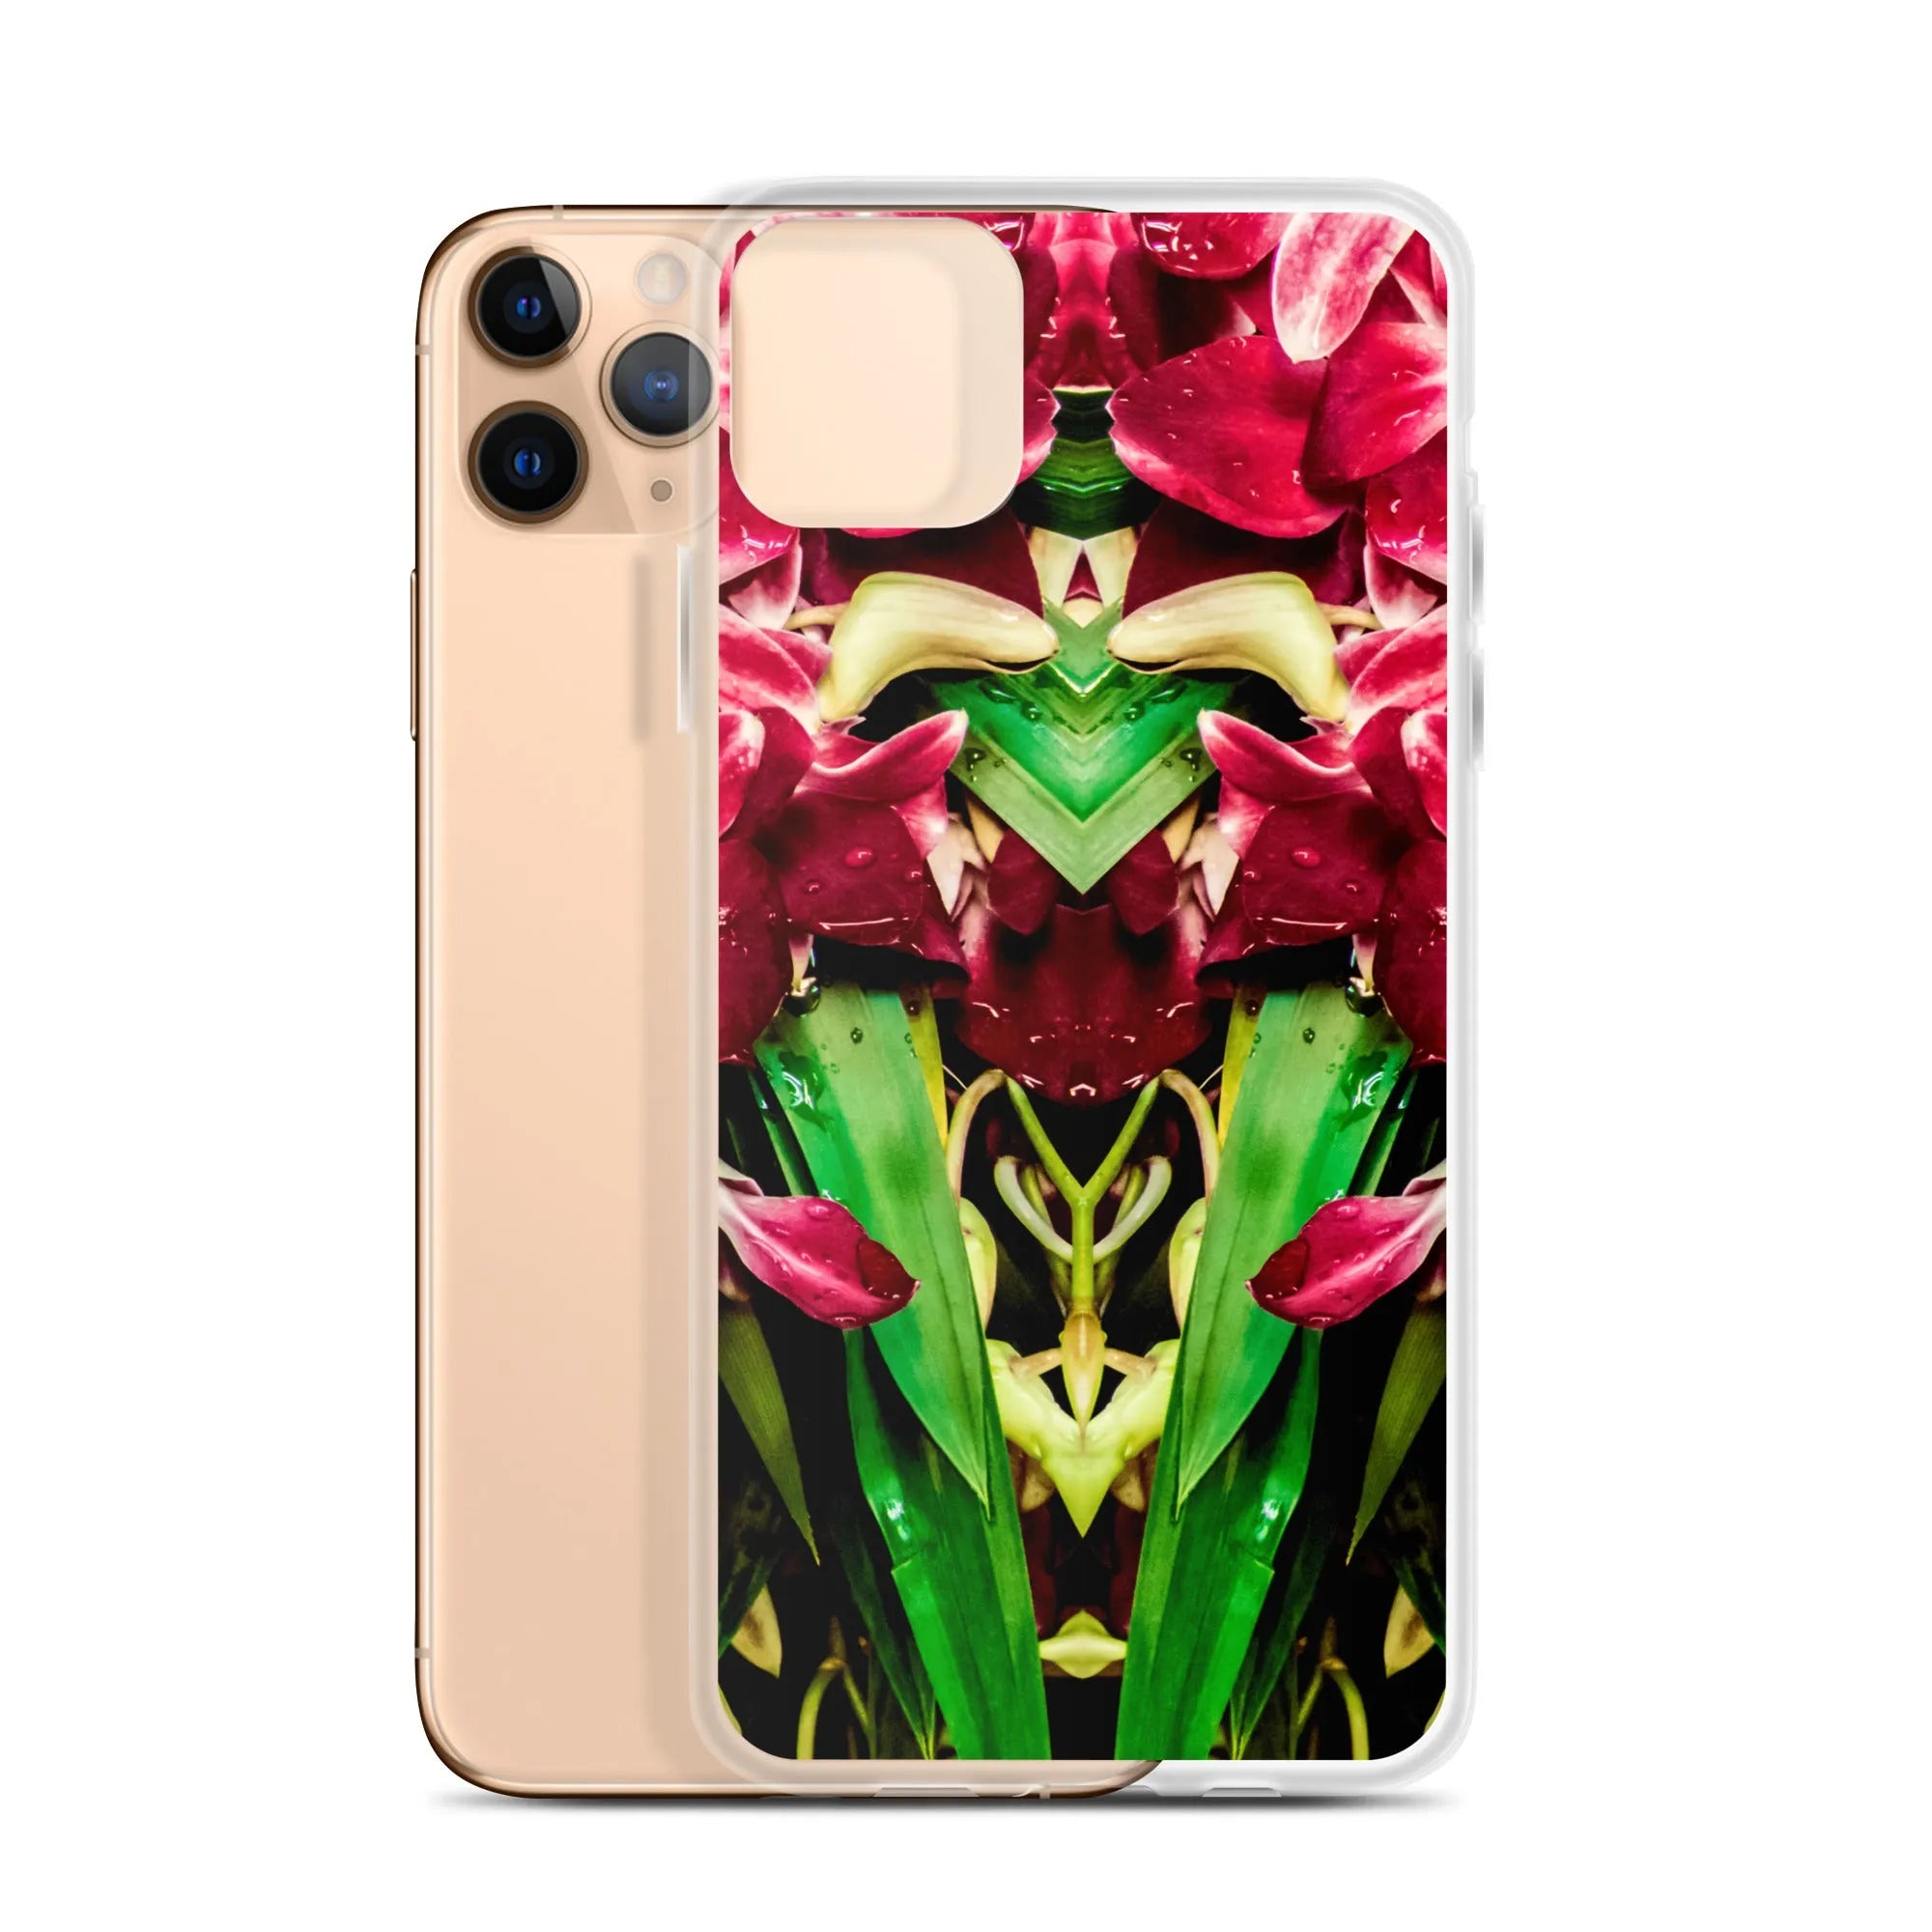 Ruby Reds² Floral Iphone Case - Iphone 11 Pro Max - Mobile Phone Cases - Aesthetic Art